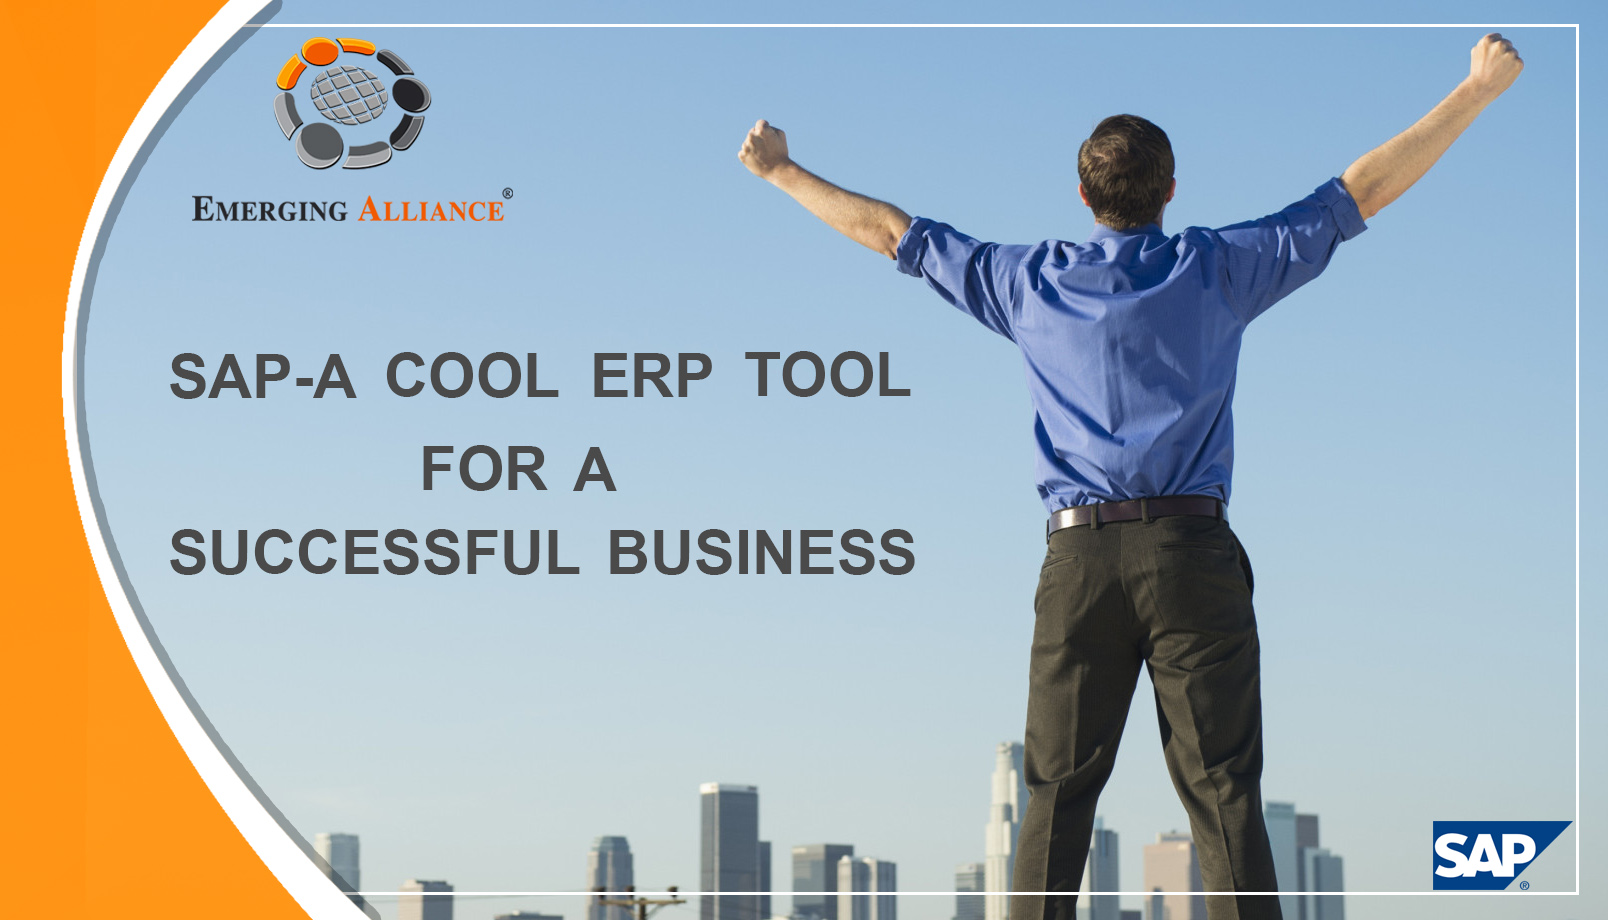 SAP A COOL ERP TOOL FOR A SUCCESSFUL BUSINESS